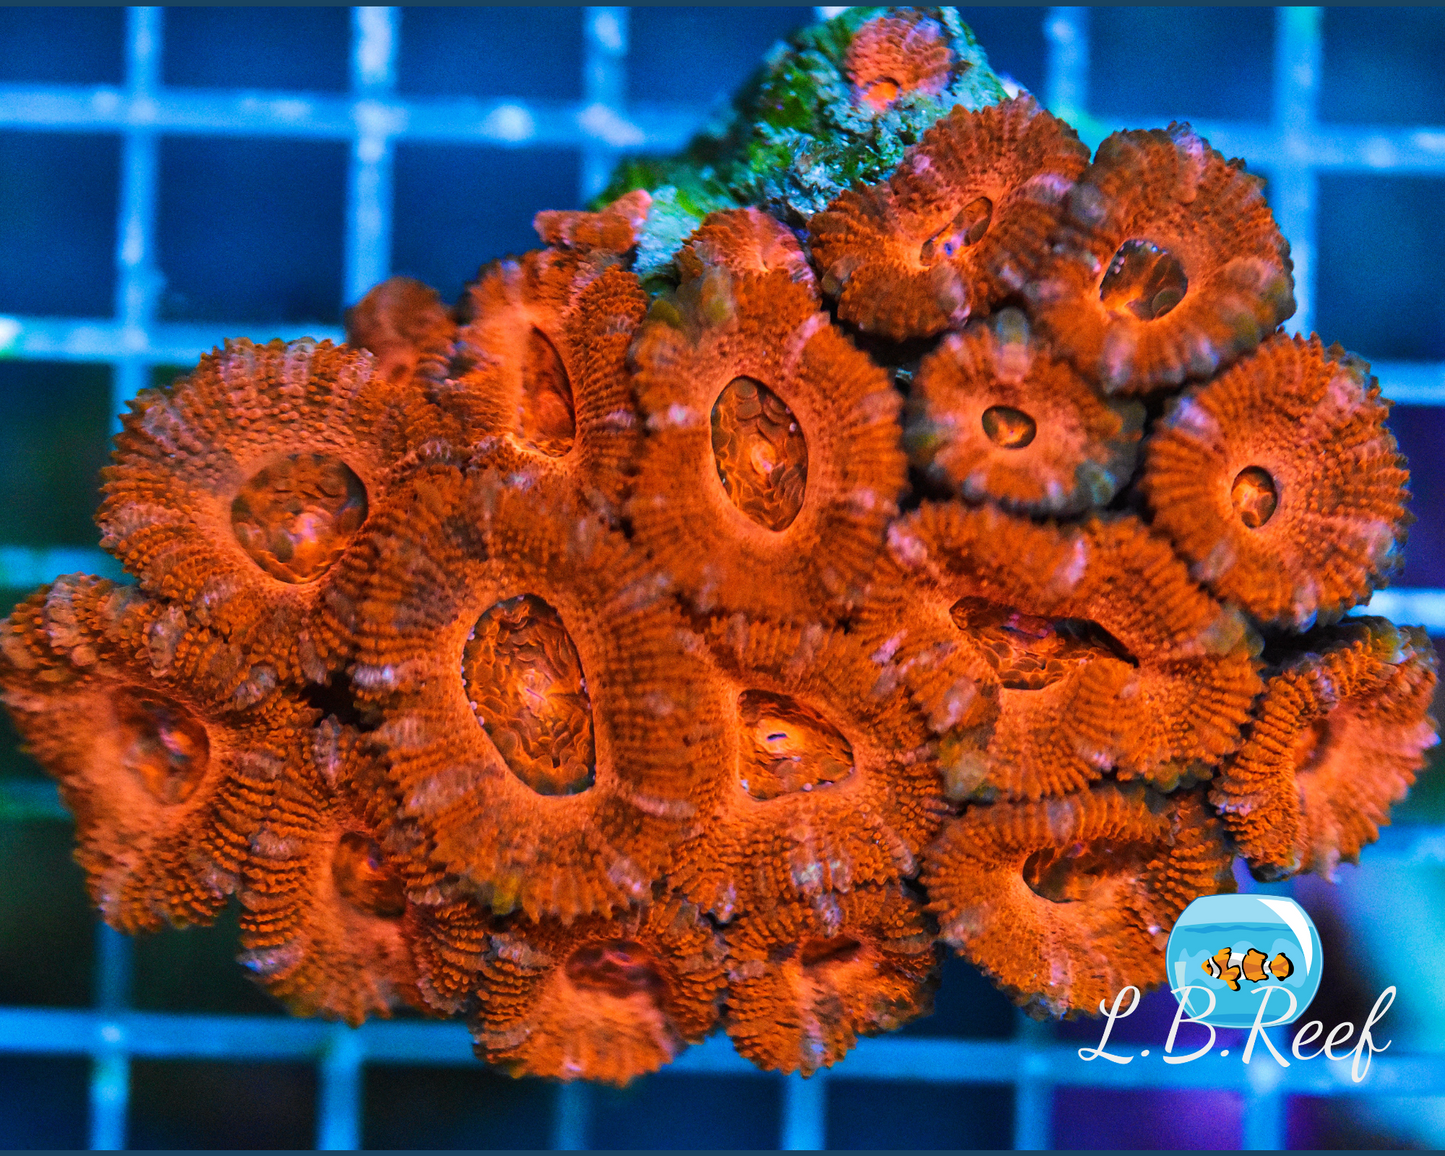 Acanthastrea lordhowensis "Ice & Fire" - L.B.Reef